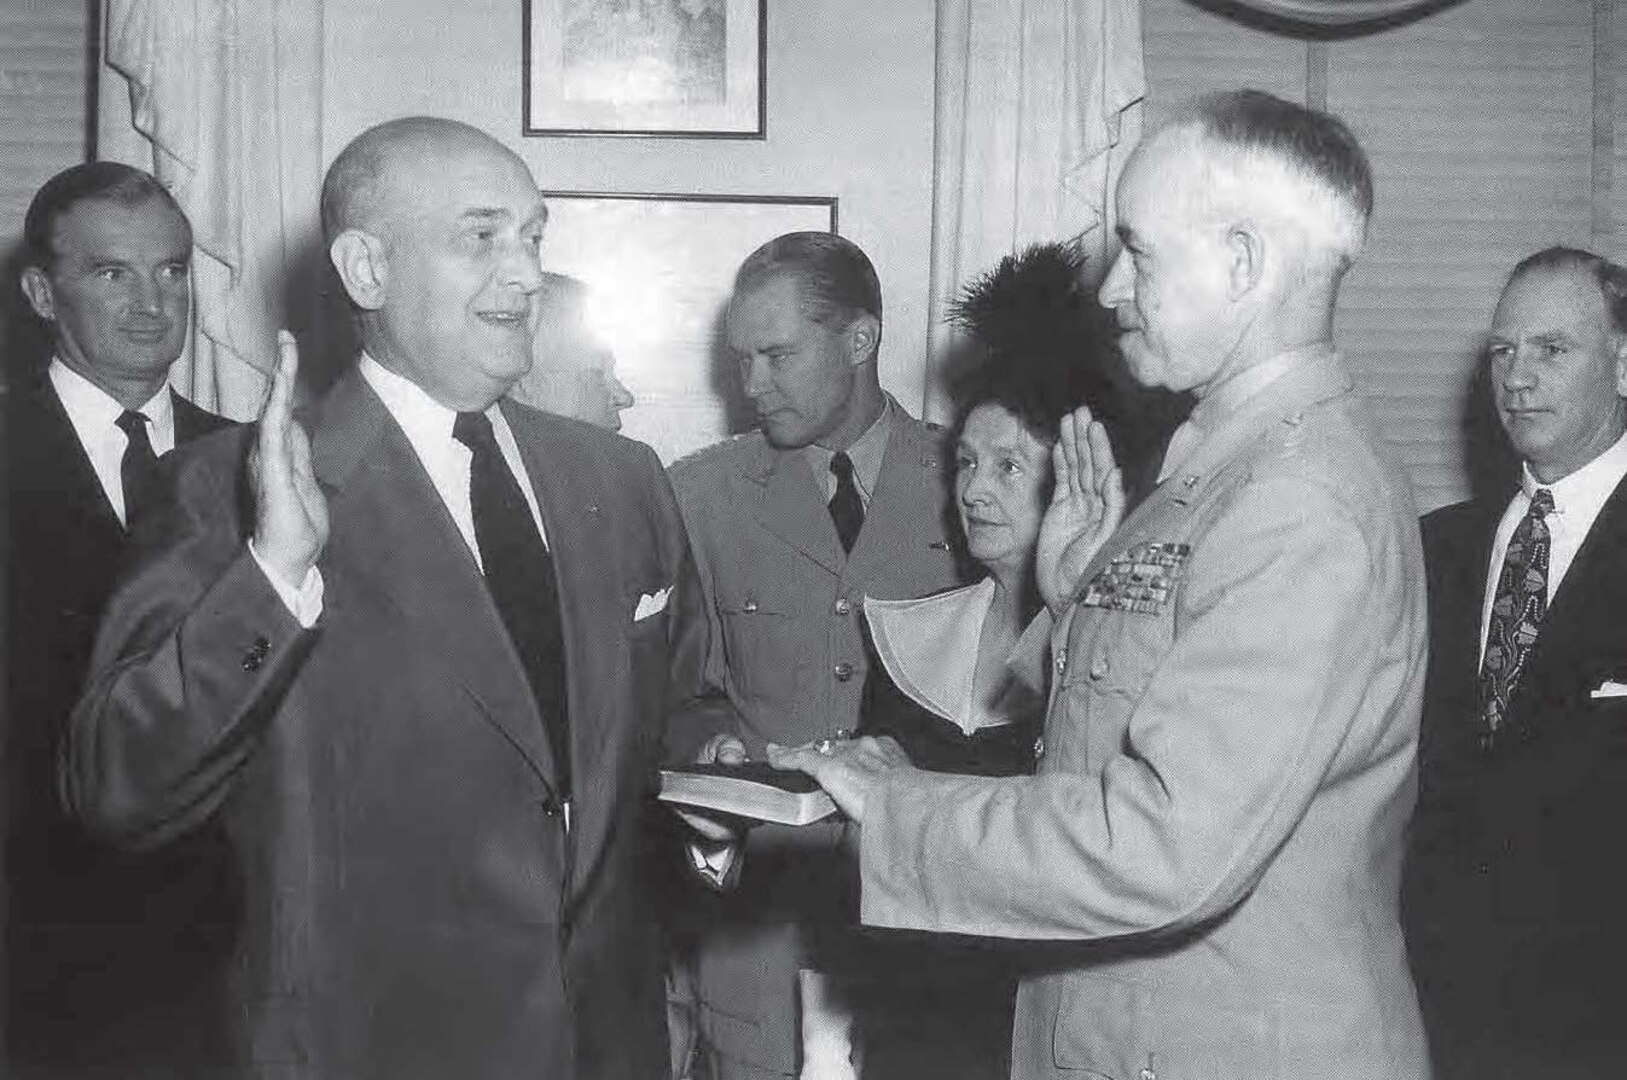 Defense Secretary Louis A. Johnson swears in General of the Army Omar N. Bradley as the nation’s first chairman of the Joint Chiefs of Staff, Aug. 16, 1949.